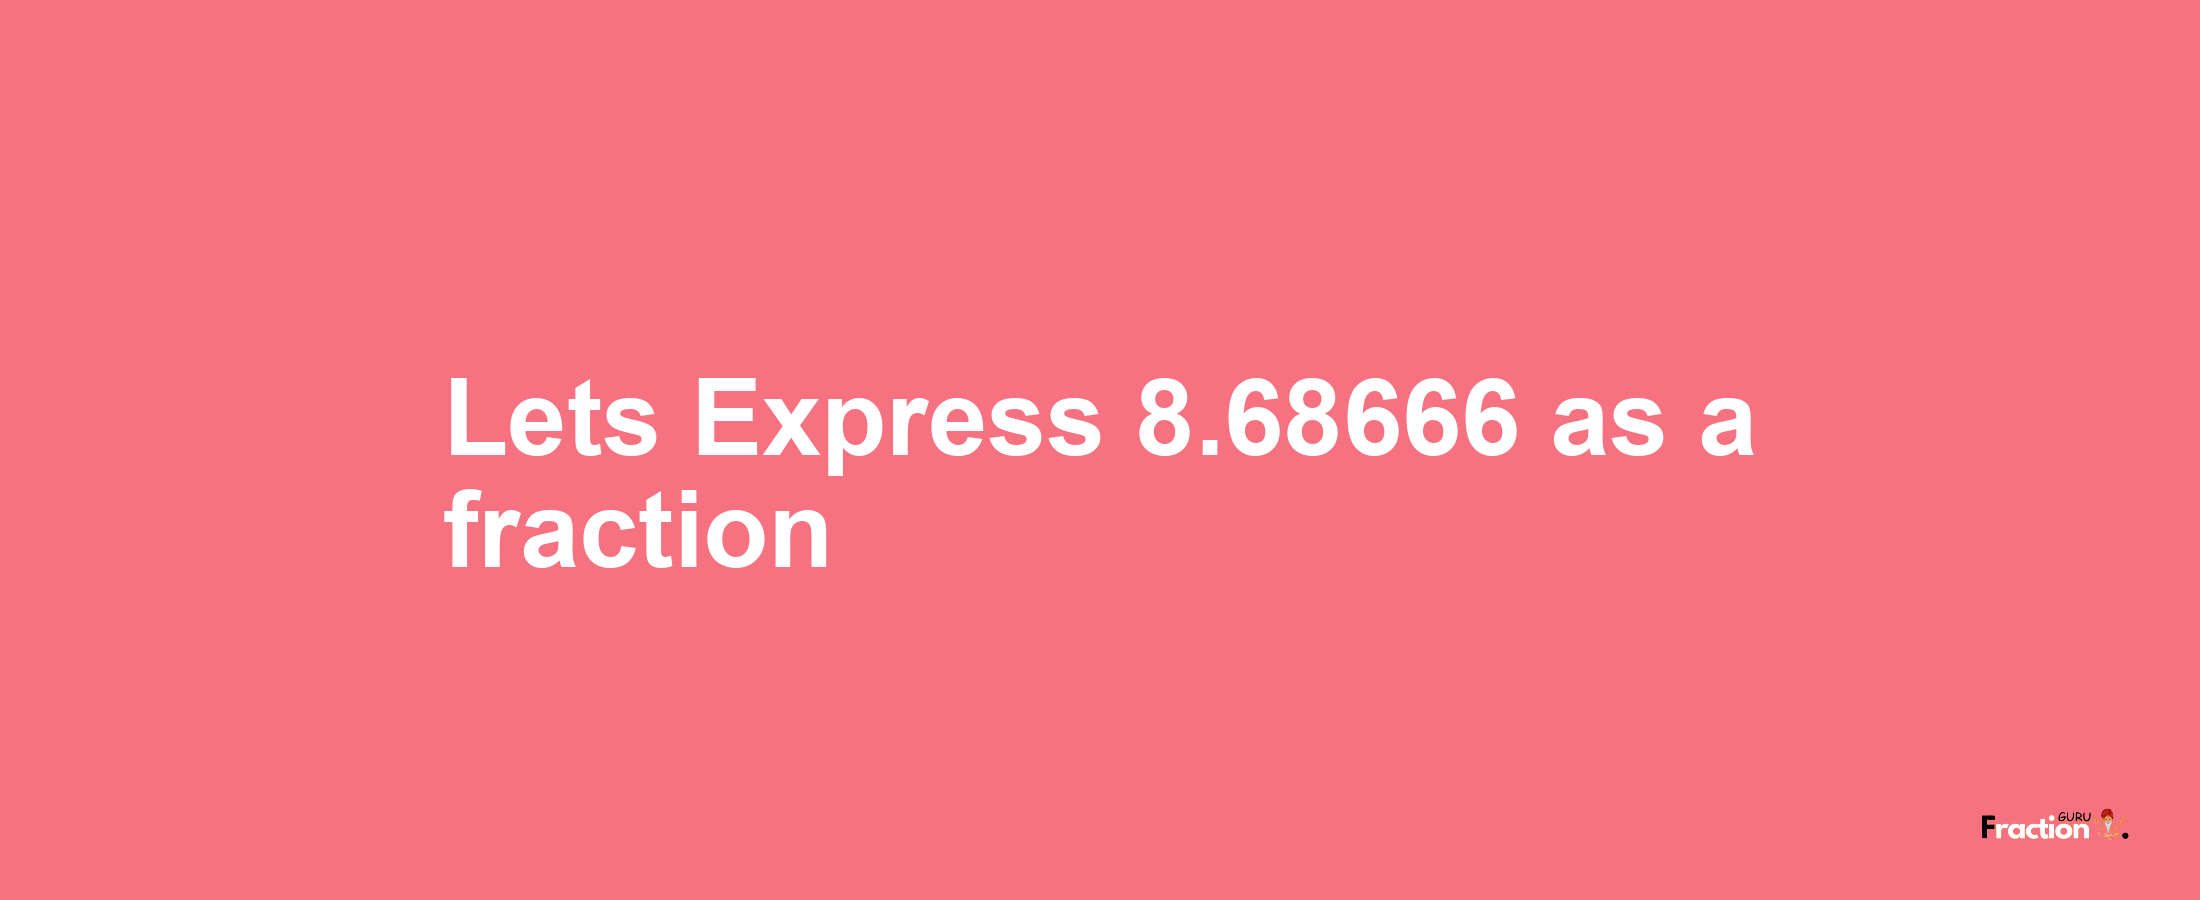 Lets Express 8.68666 as afraction